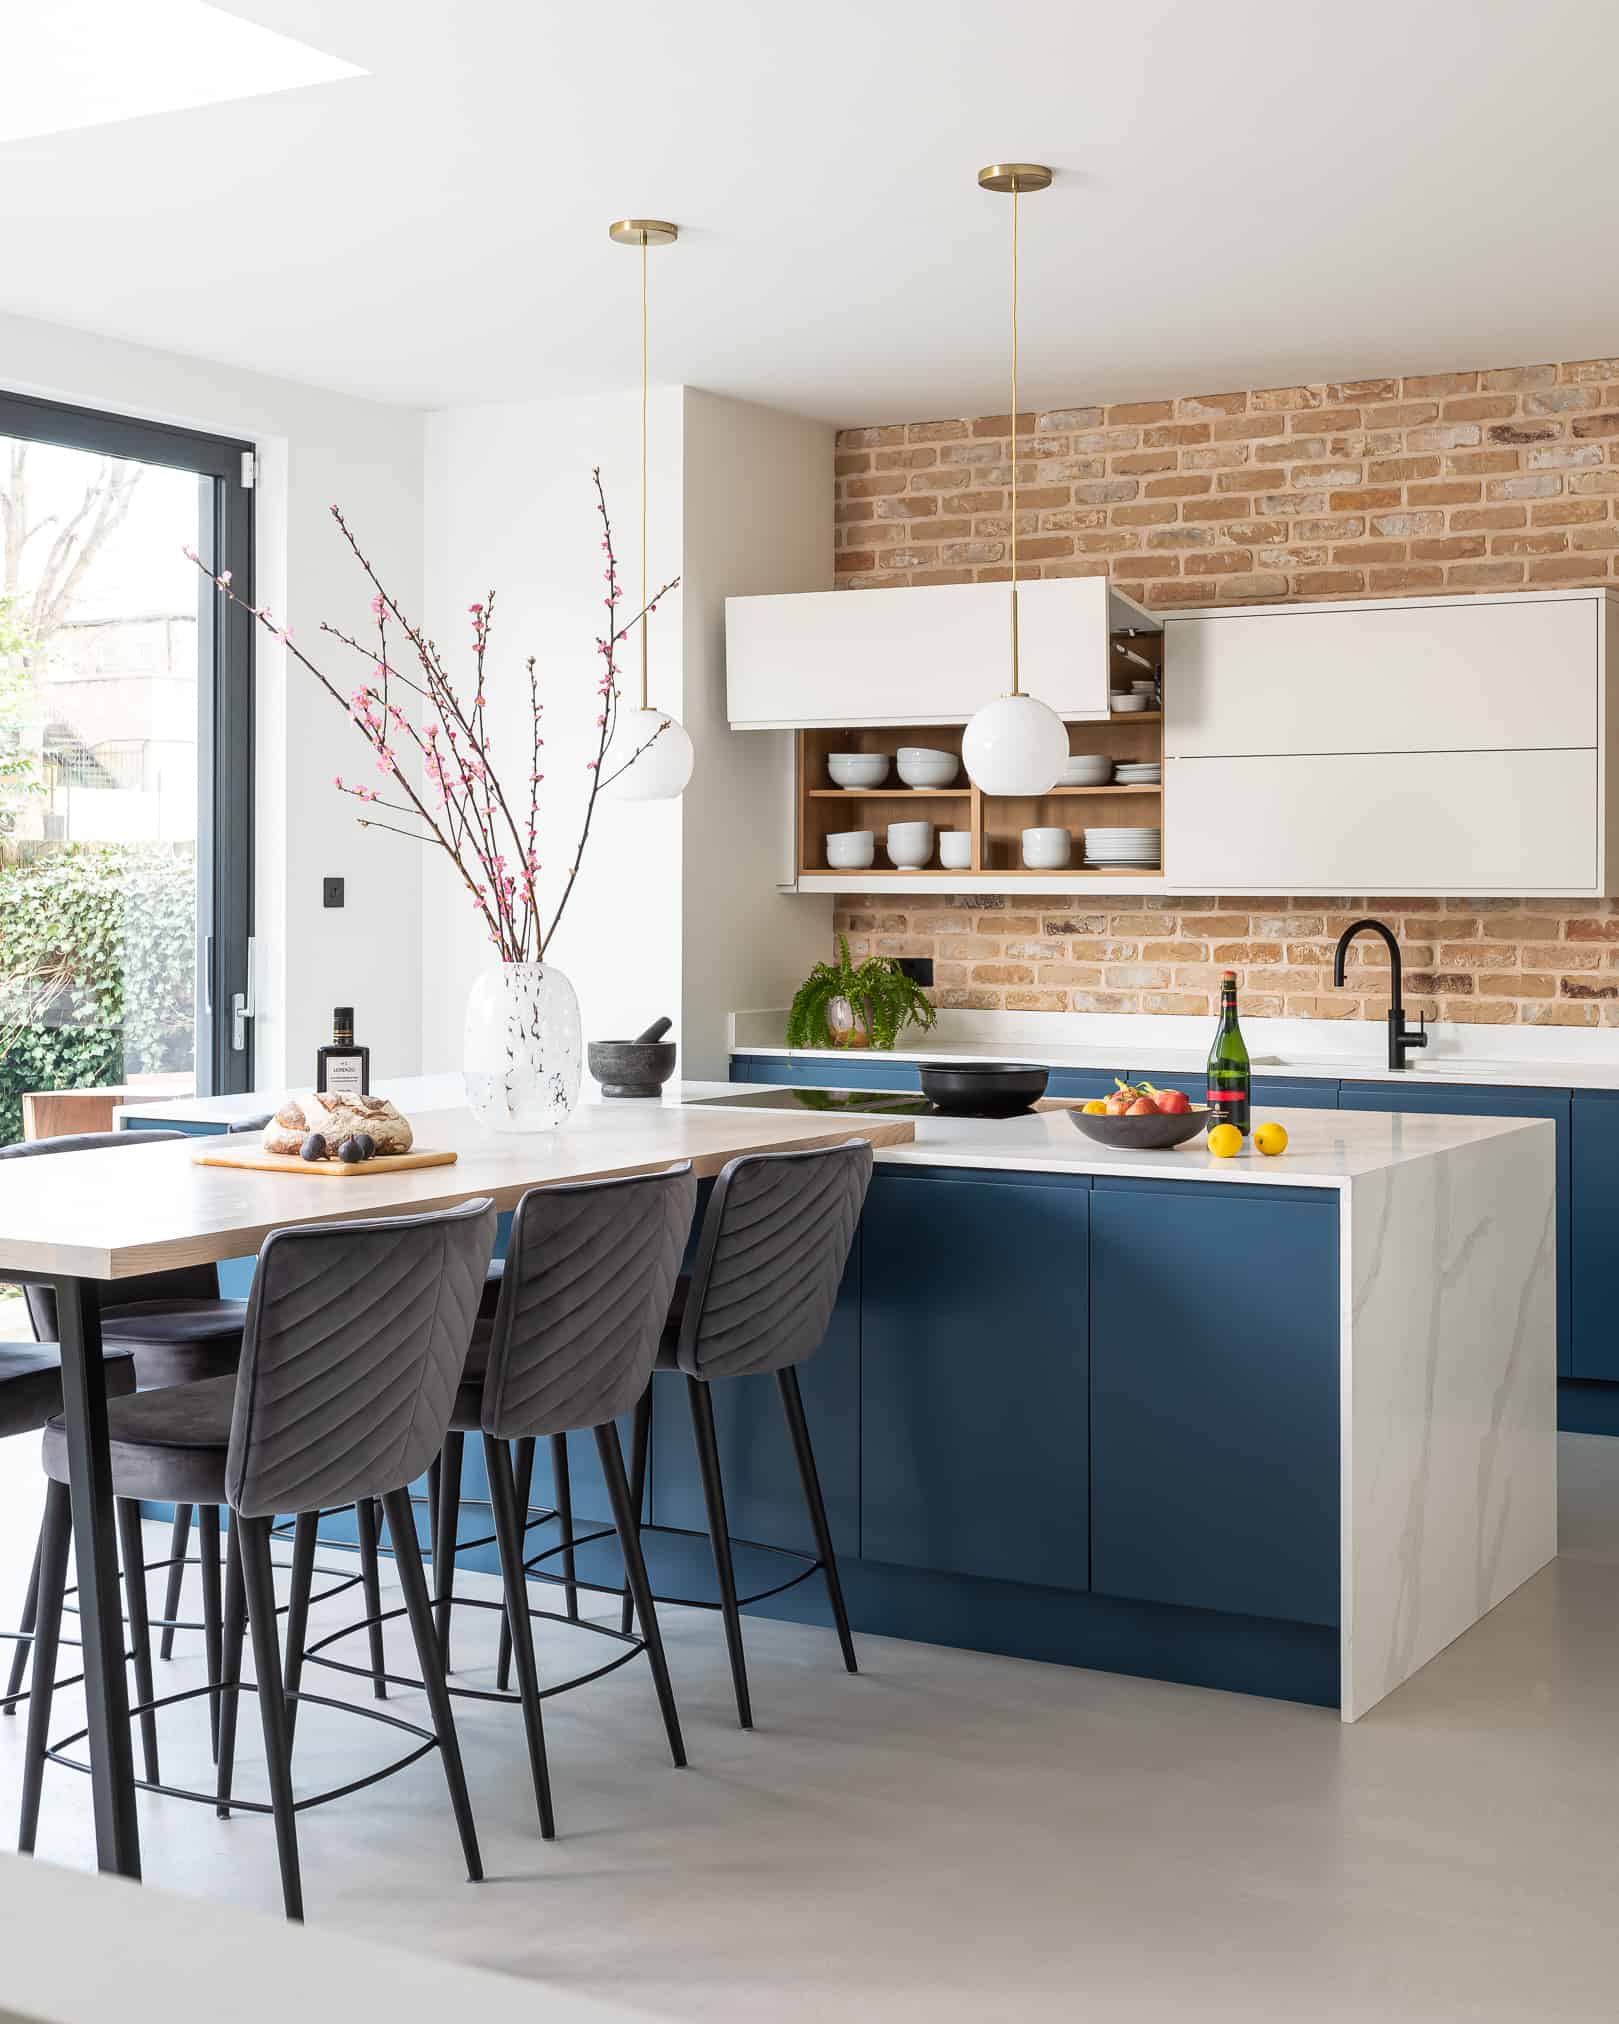 John Lewis of Hungerford pure luxury handmade minimalist kitchen with blue cabinetry and kitchen island with marble worktops